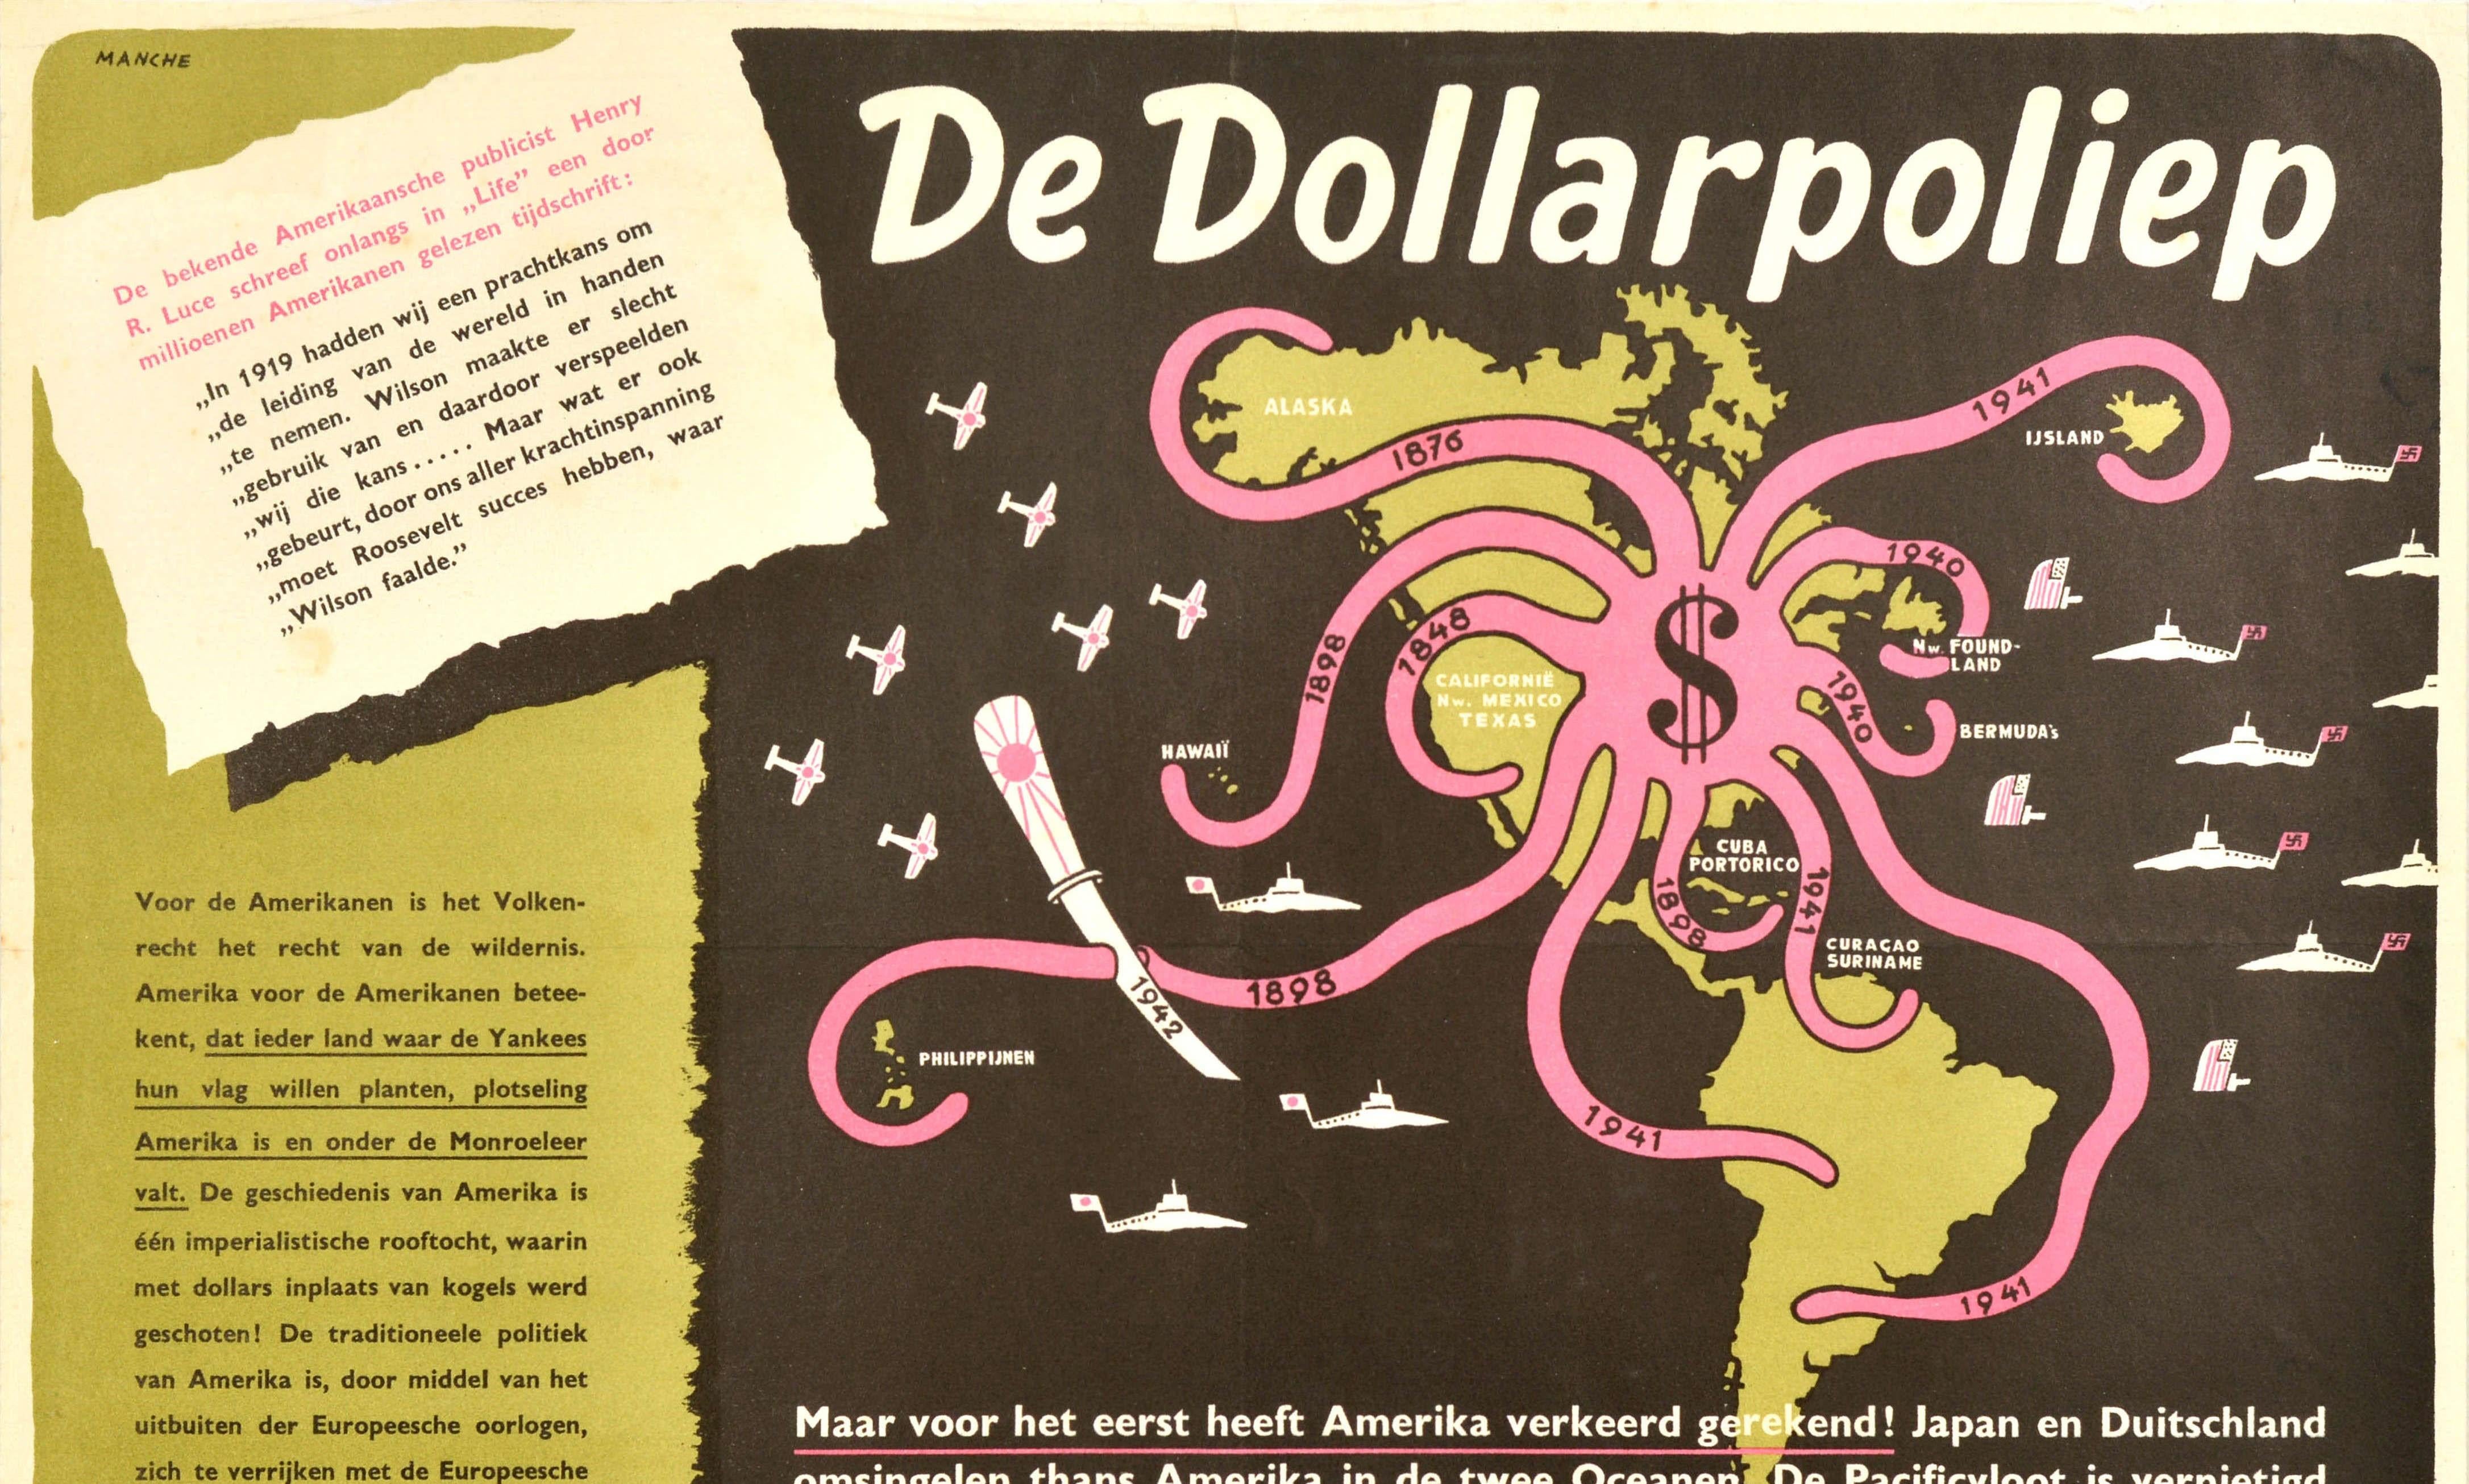 Original vintage anti-American imperialism World War Two political propaganda poster - De Dollarpoliep / The Dollar Polyp or The Dollar Octopus - featuring an image of a US dollar sign with octopus like tentacles reaching into different countries on